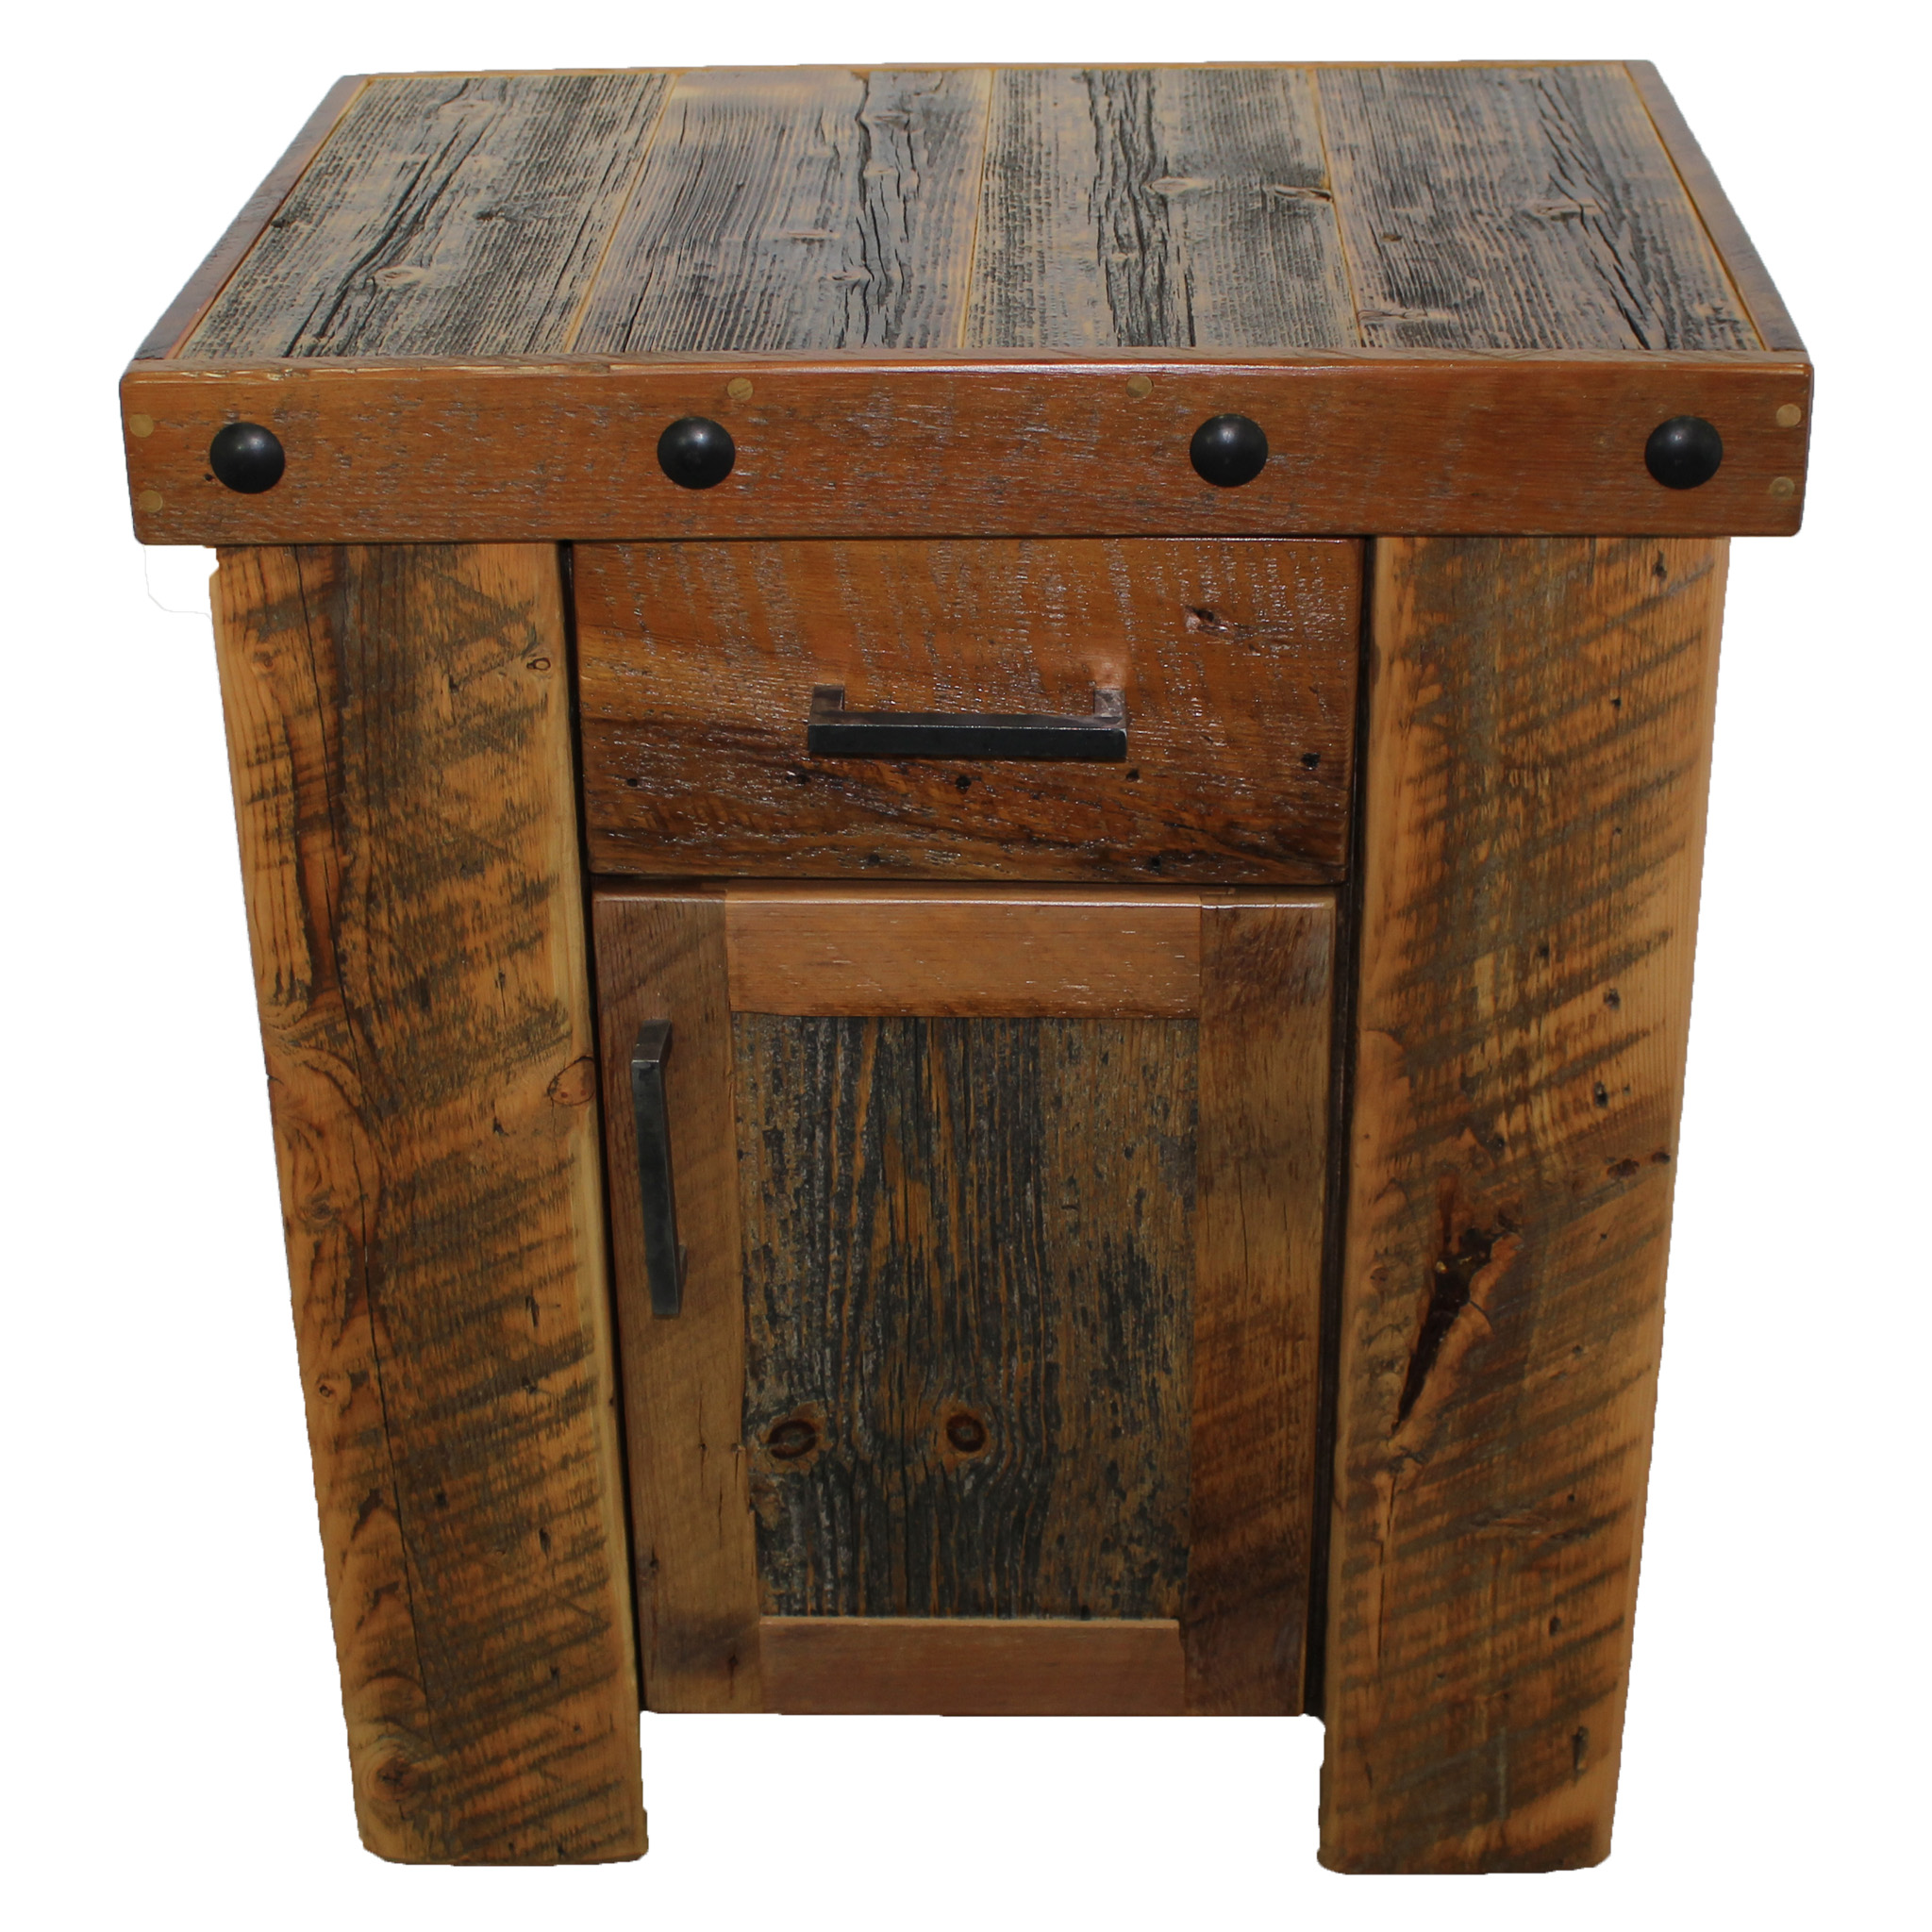 Reclaimed Wood Timber Cabinet Nightstand With Hidden Compartment